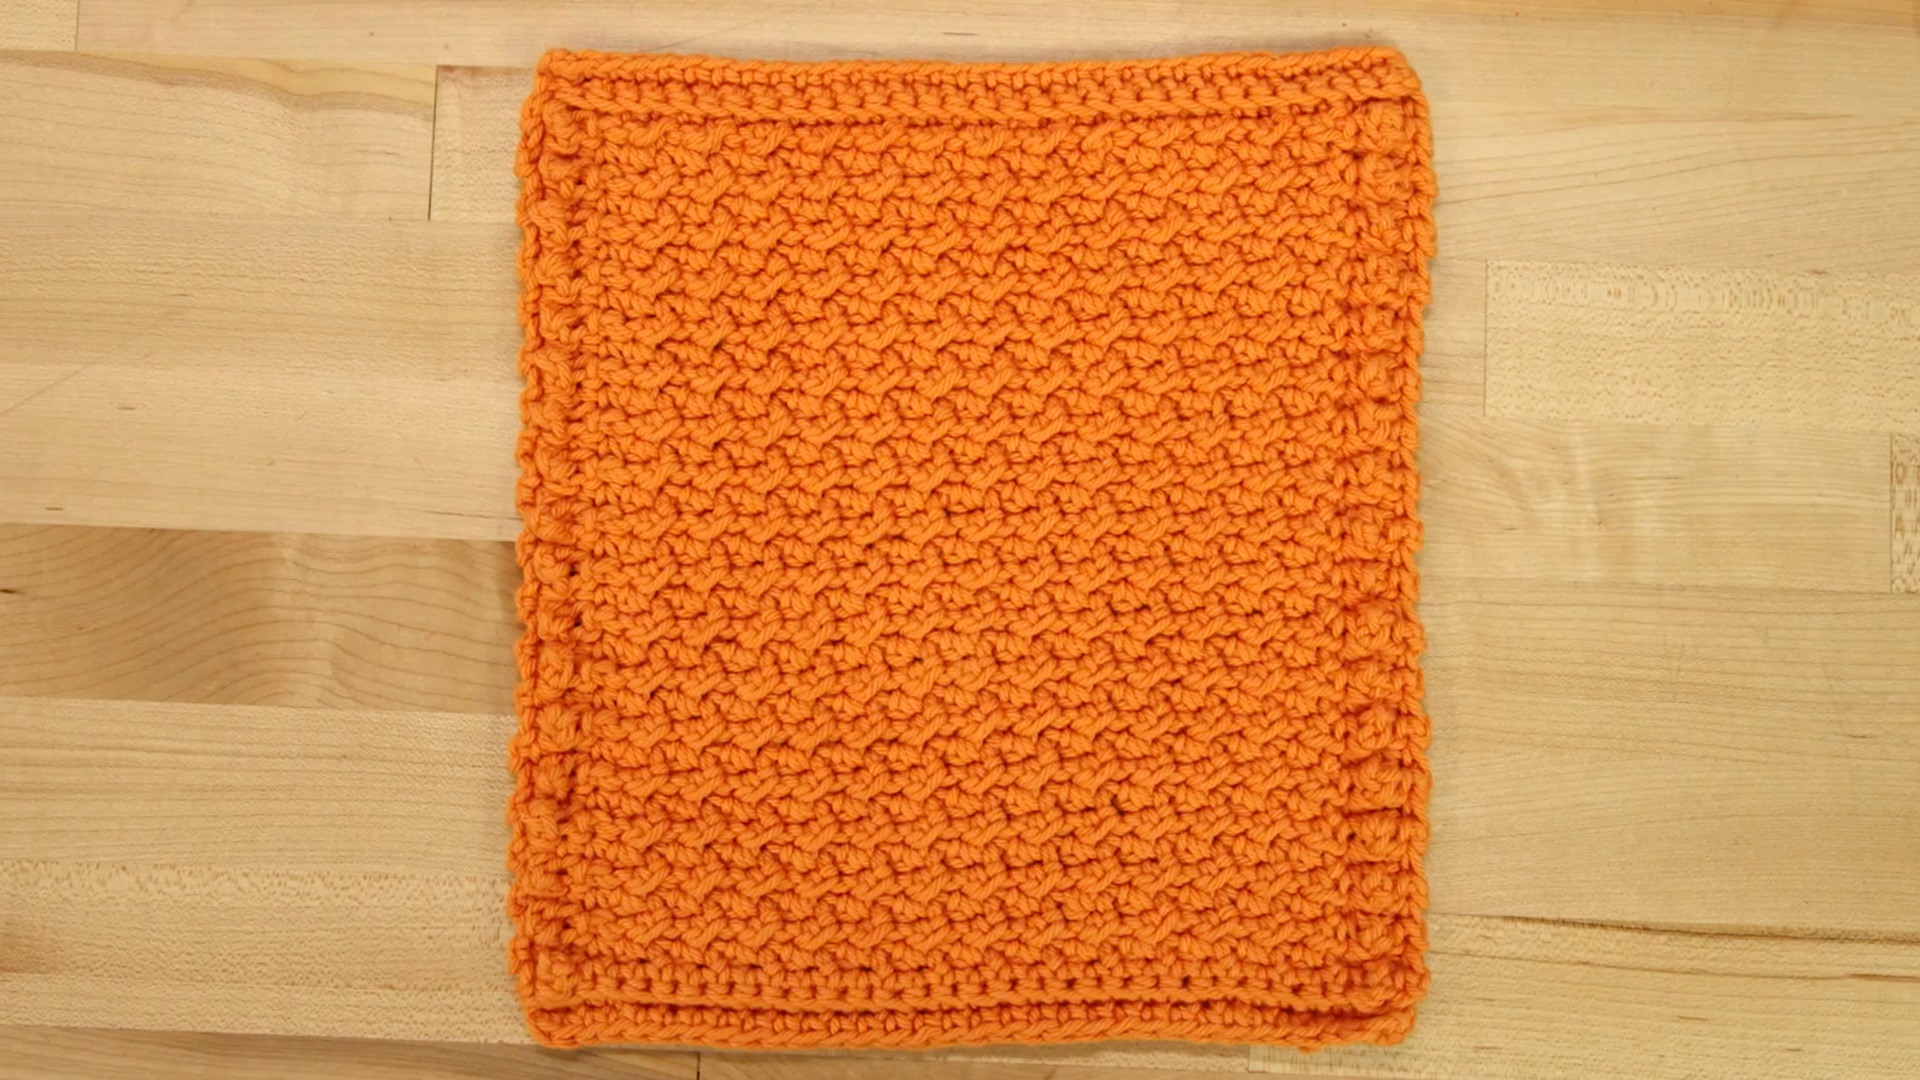 Beth’s Simple Textures Dishcloth | Beth Grahamarticle featured image thumbnail.